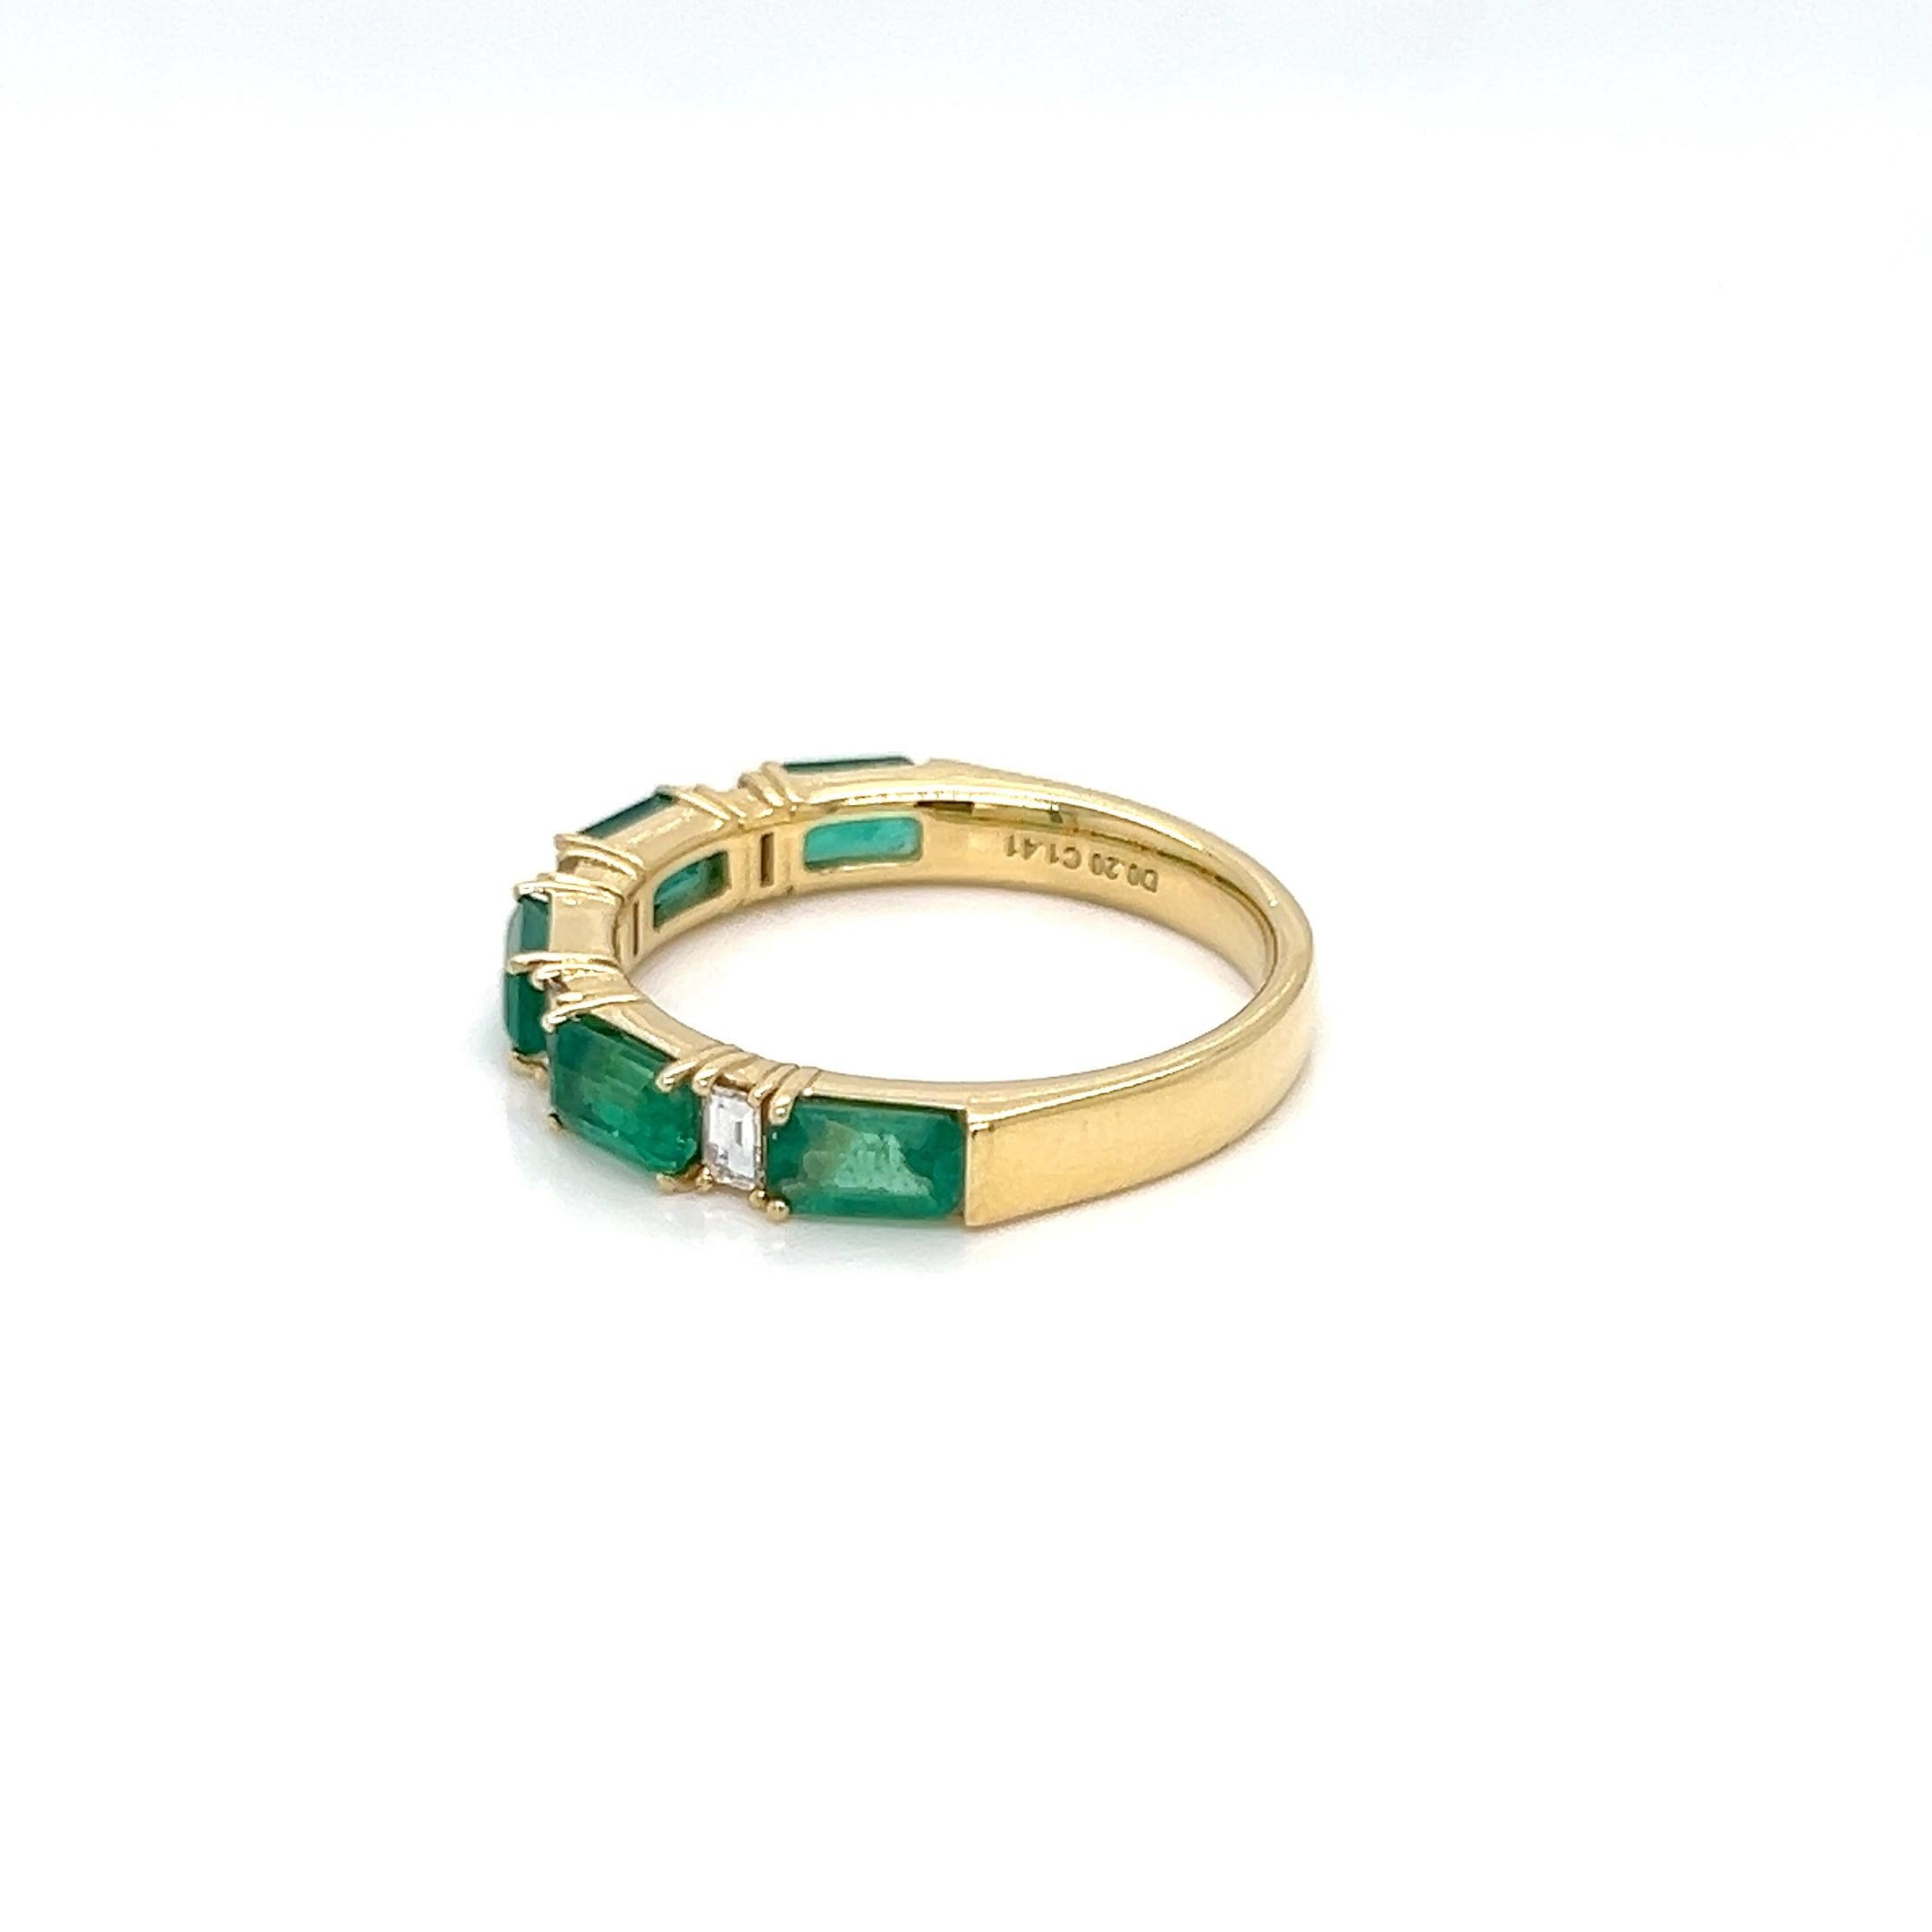 Introducing our captivating 1.61 Carats Zambian Emerald Baguette and Diamond Half Eternity Ring, a stunning blend of sophistication and allure. This ring combines the timeless elegance of Zambian emeralds with the brilliance of diamonds, resulting